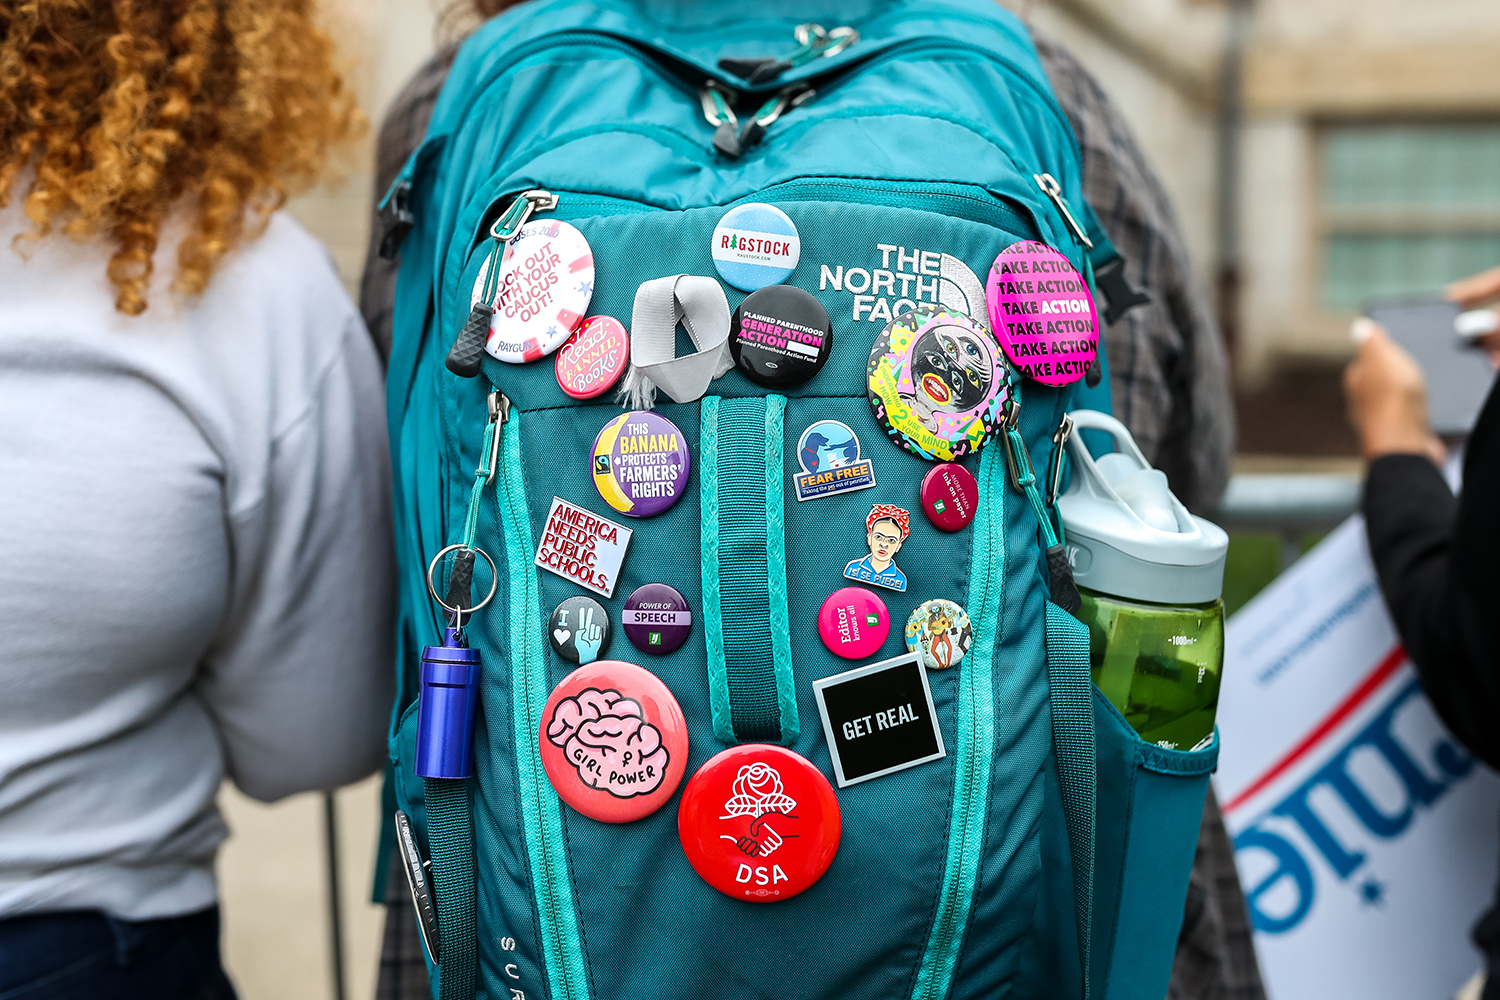  An attendee's backpack during a campaign rally for Democratic Presidential Candidate Senator Bernie Sanders (I-VT) on the Pentacrest at the University of Iowa in Iowa City on Sunday, Sep. 8, 2019.  